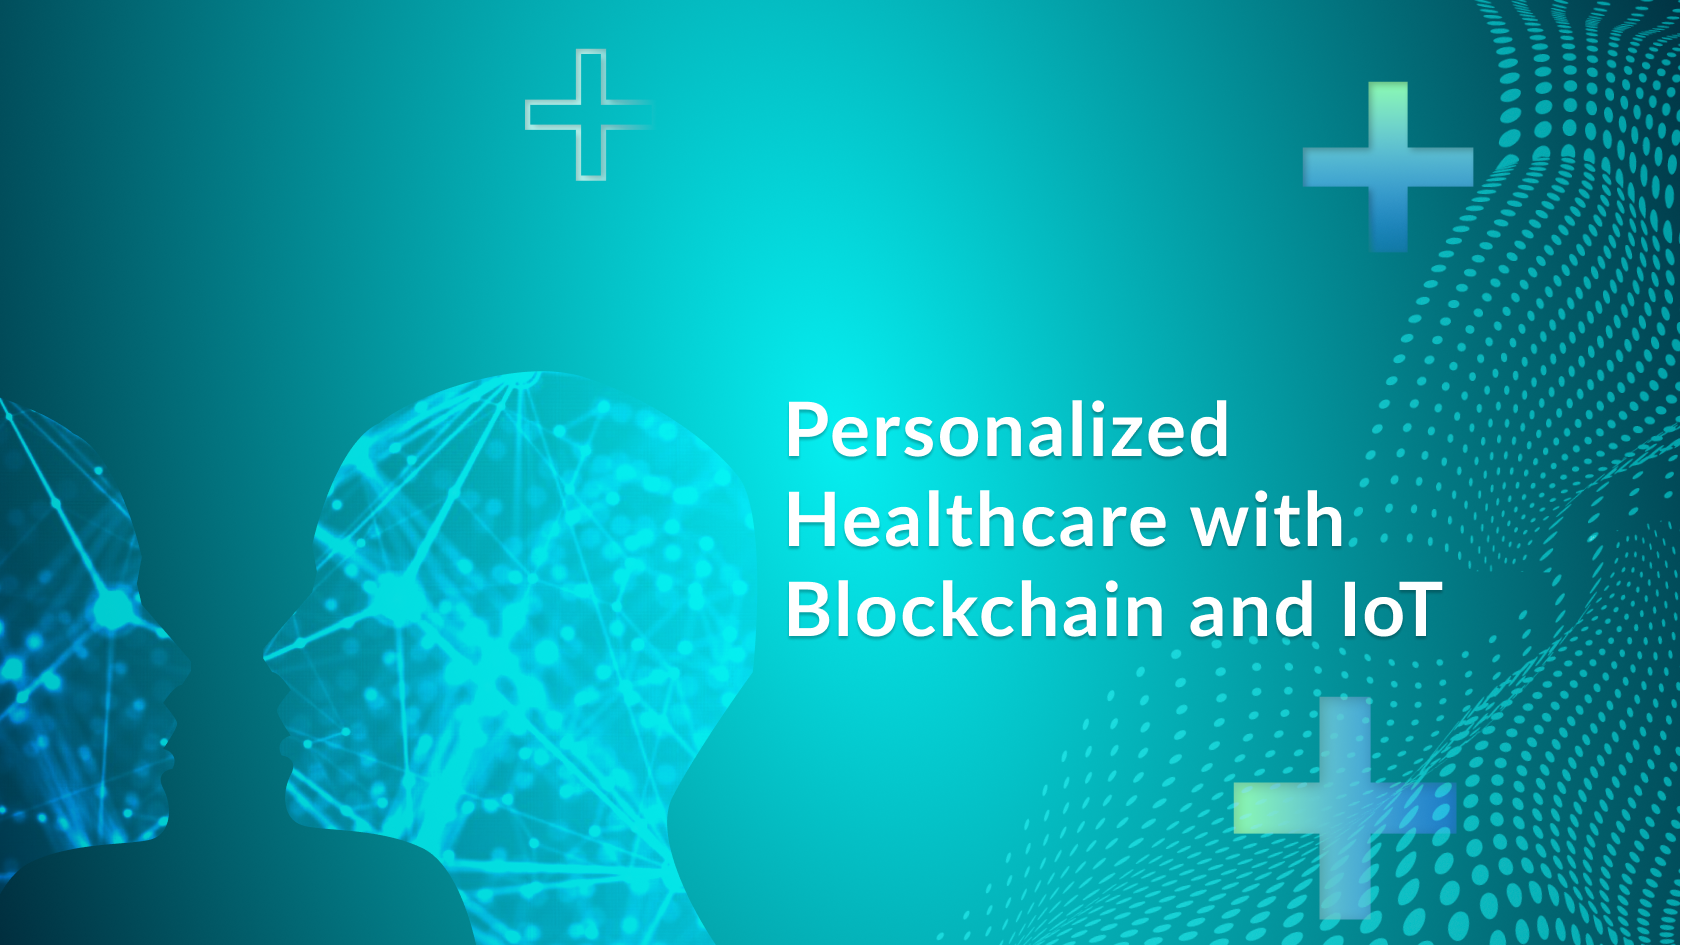 Personalized healthcare with Blockchain and IoT